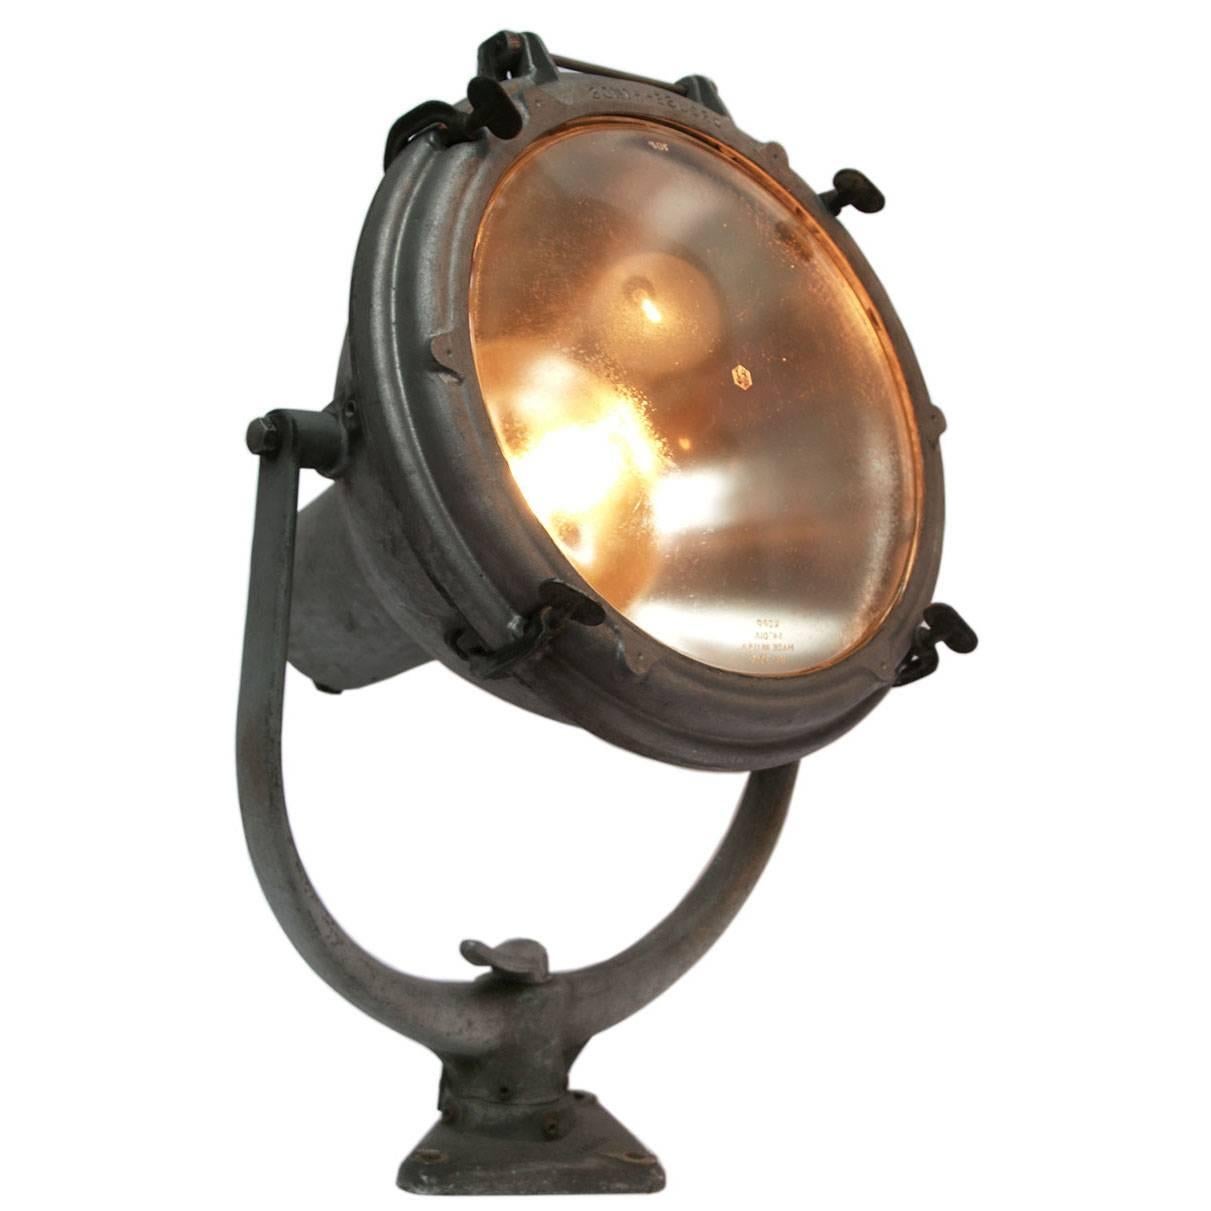 Crouse-Hinds Spot USA. Cast aluminium with clear glass. Floor or wall or table light.

Weight: 11.9 kg / 26.2 lb

All lamps have been made suitable by international standards for incandescent light bulbs, energy-efficient and LED bulbs. E26/E27